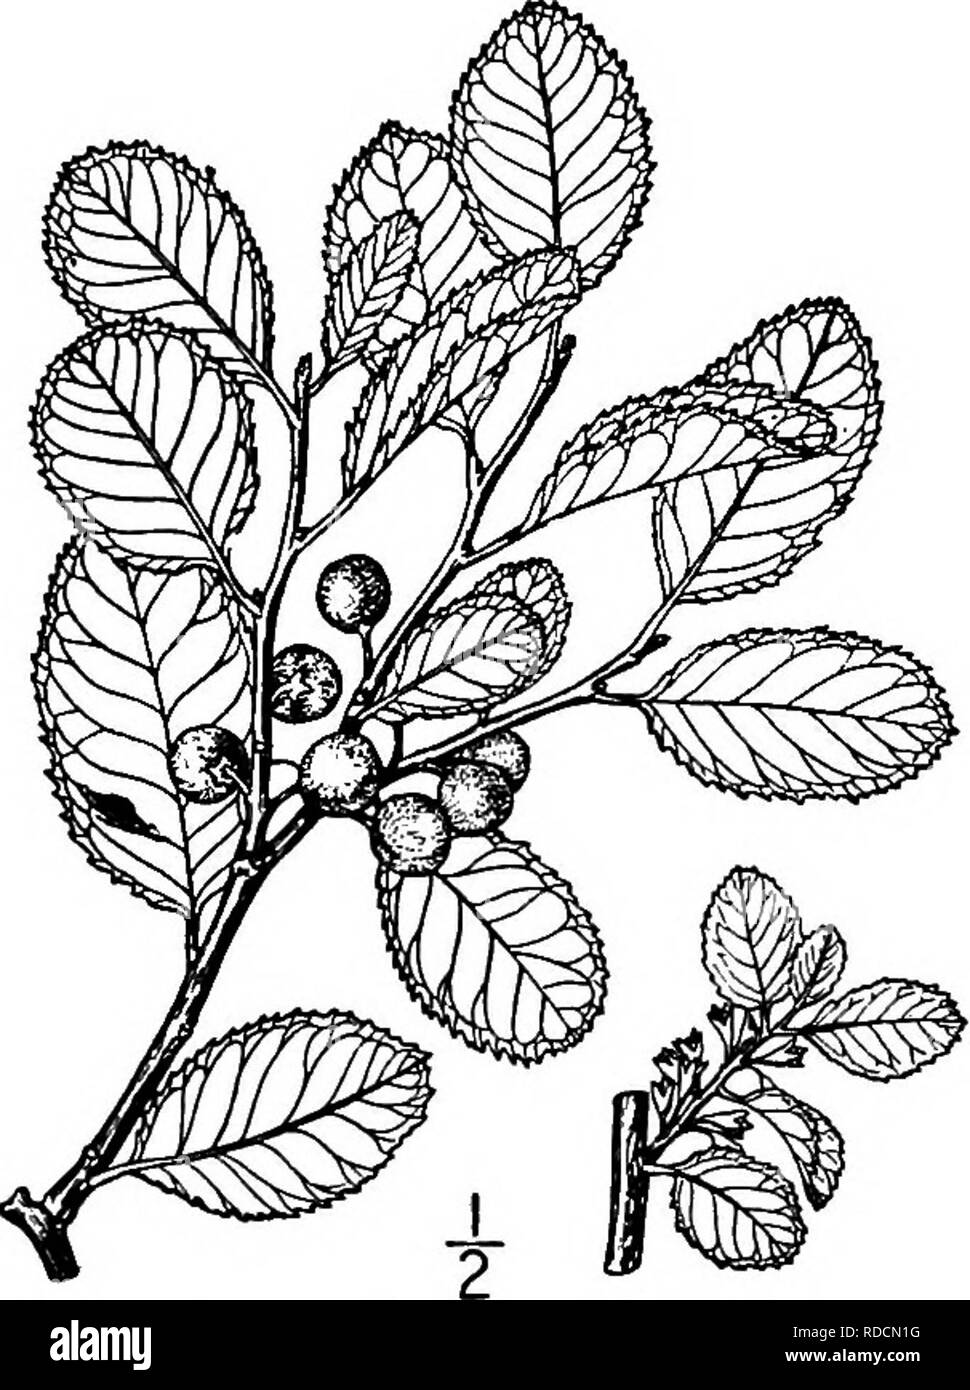 . North American trees : being descriptions and illustrations of the trees growing independently of cultivation in North America, north of Mexico and the West Indies . Trees. 678 The Buckthorns Its bark is thin and gray. The young twigs are green, more or less hairy, turning reddish brown and becoming smooth. The buds are not more than 2 mm. long, their scales hairy-fringed. The leaves are firm in texture, ovate to oval or nearly as wide as long, sharply toothed with bristle- tipped teeth, smooth or very nearly so, yeUow- green, blunt, pointed, or sometimes notched at the apex, blunt or narrow Stock Photo